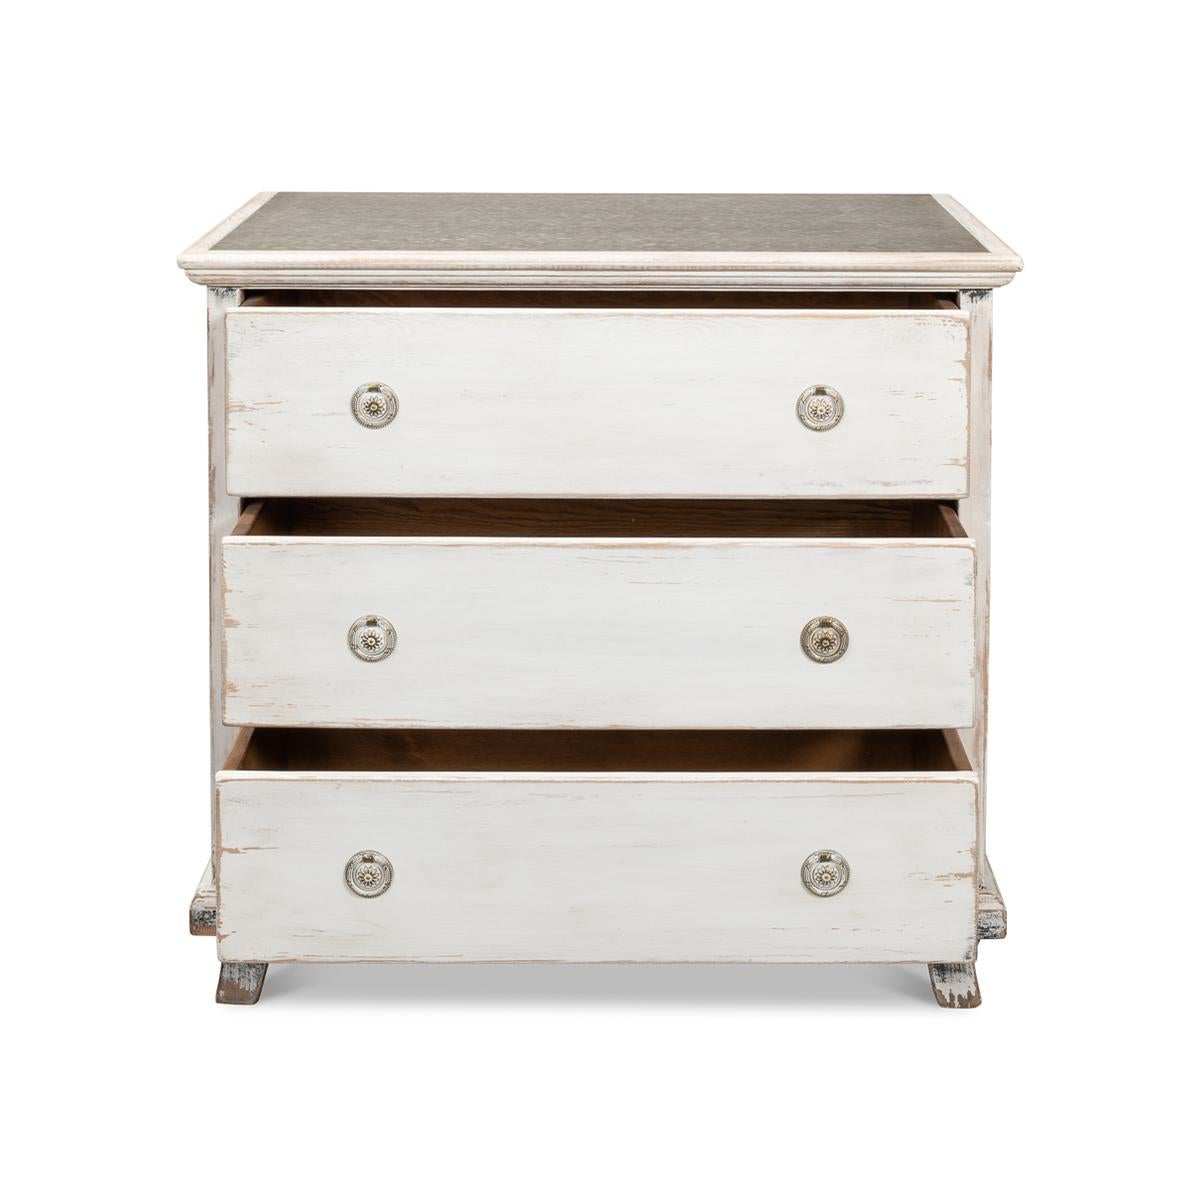 Asian European Rustic Painted Dresser For Sale